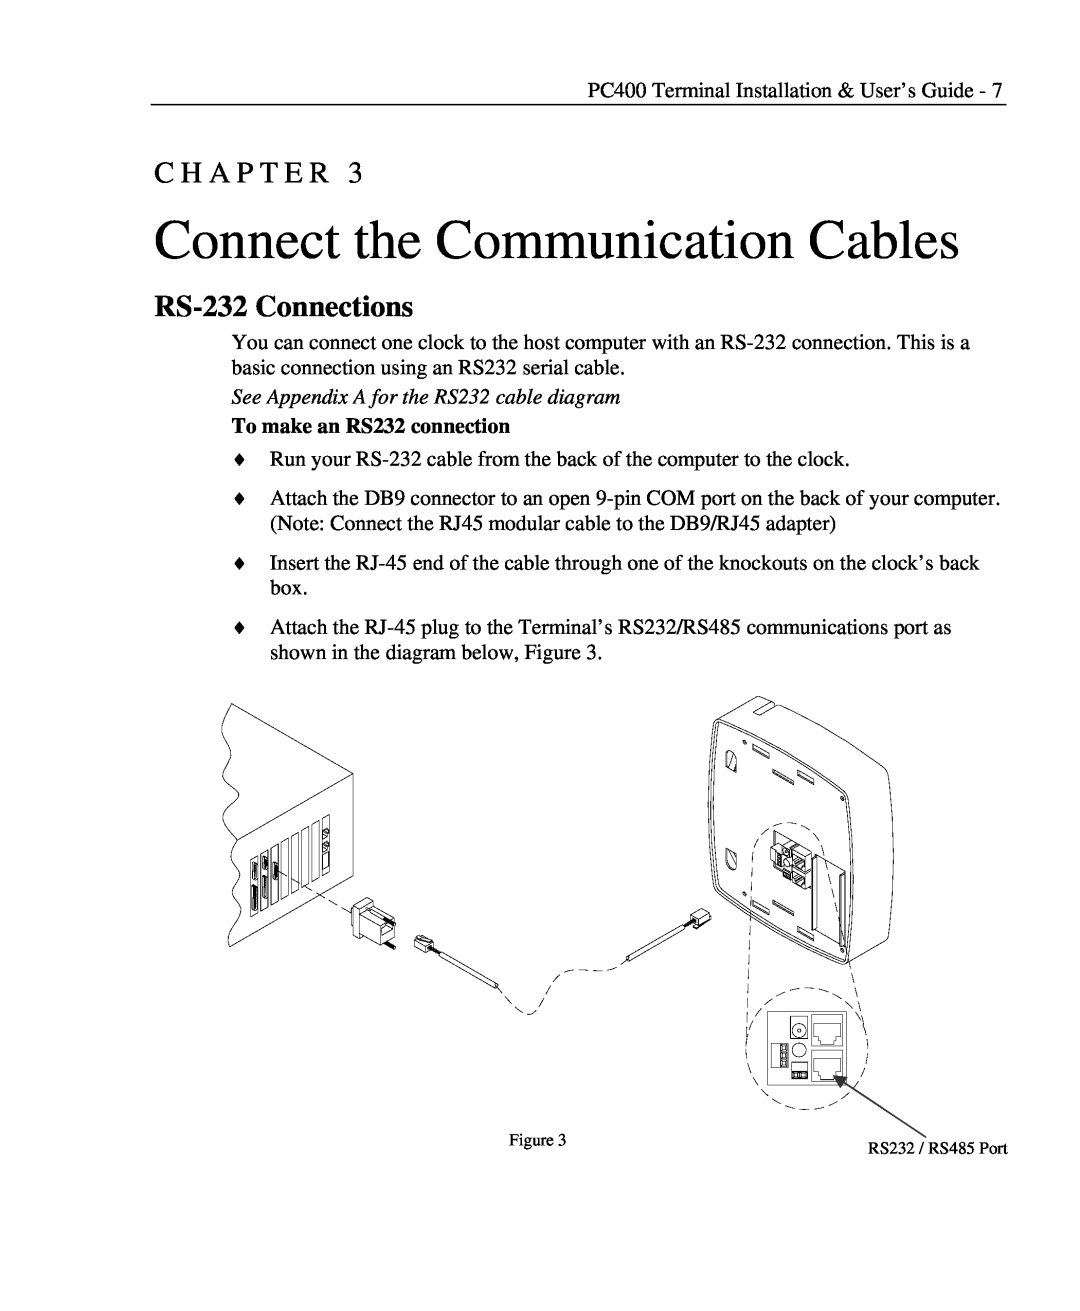 Lathem PC400TX manual Connect the Communication Cables, RS-232 Connections, To make an RS232 connection, C H A P T E R 